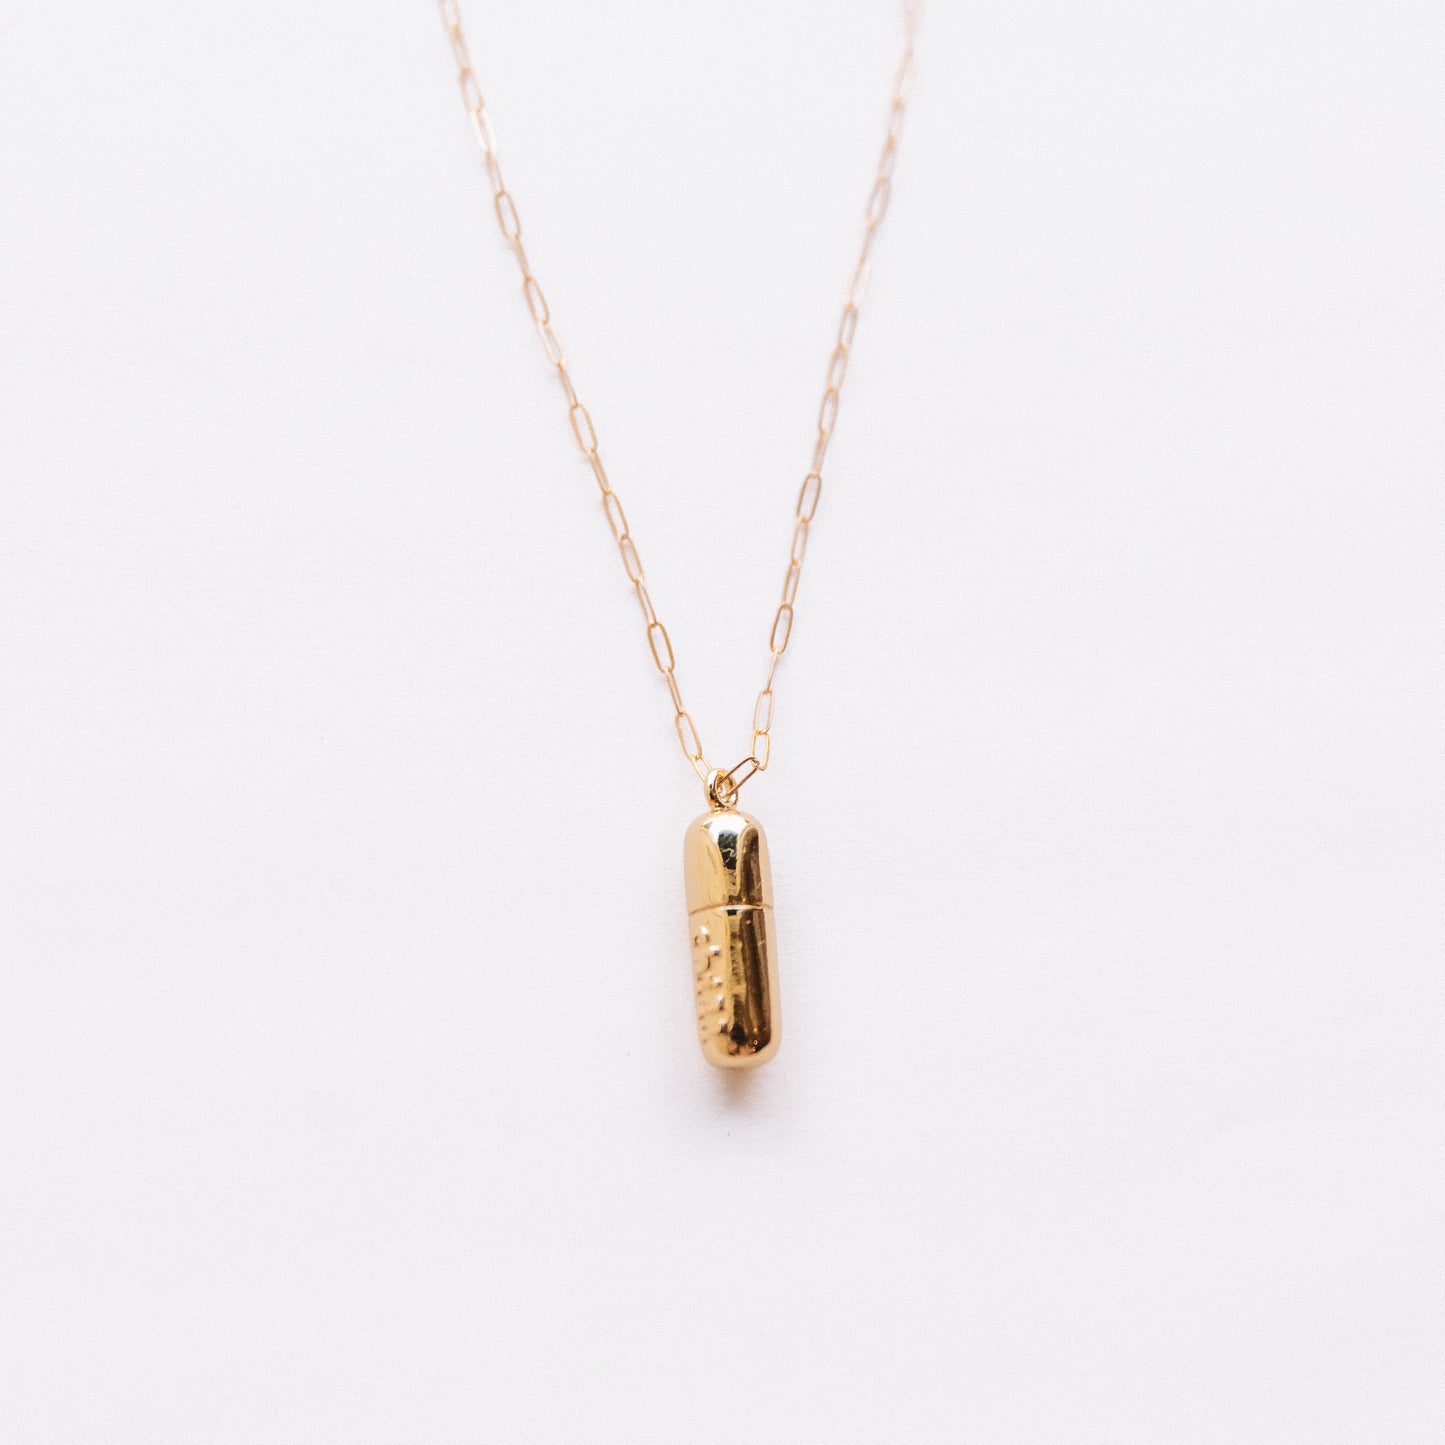 The Gold Chill Pill Necklace